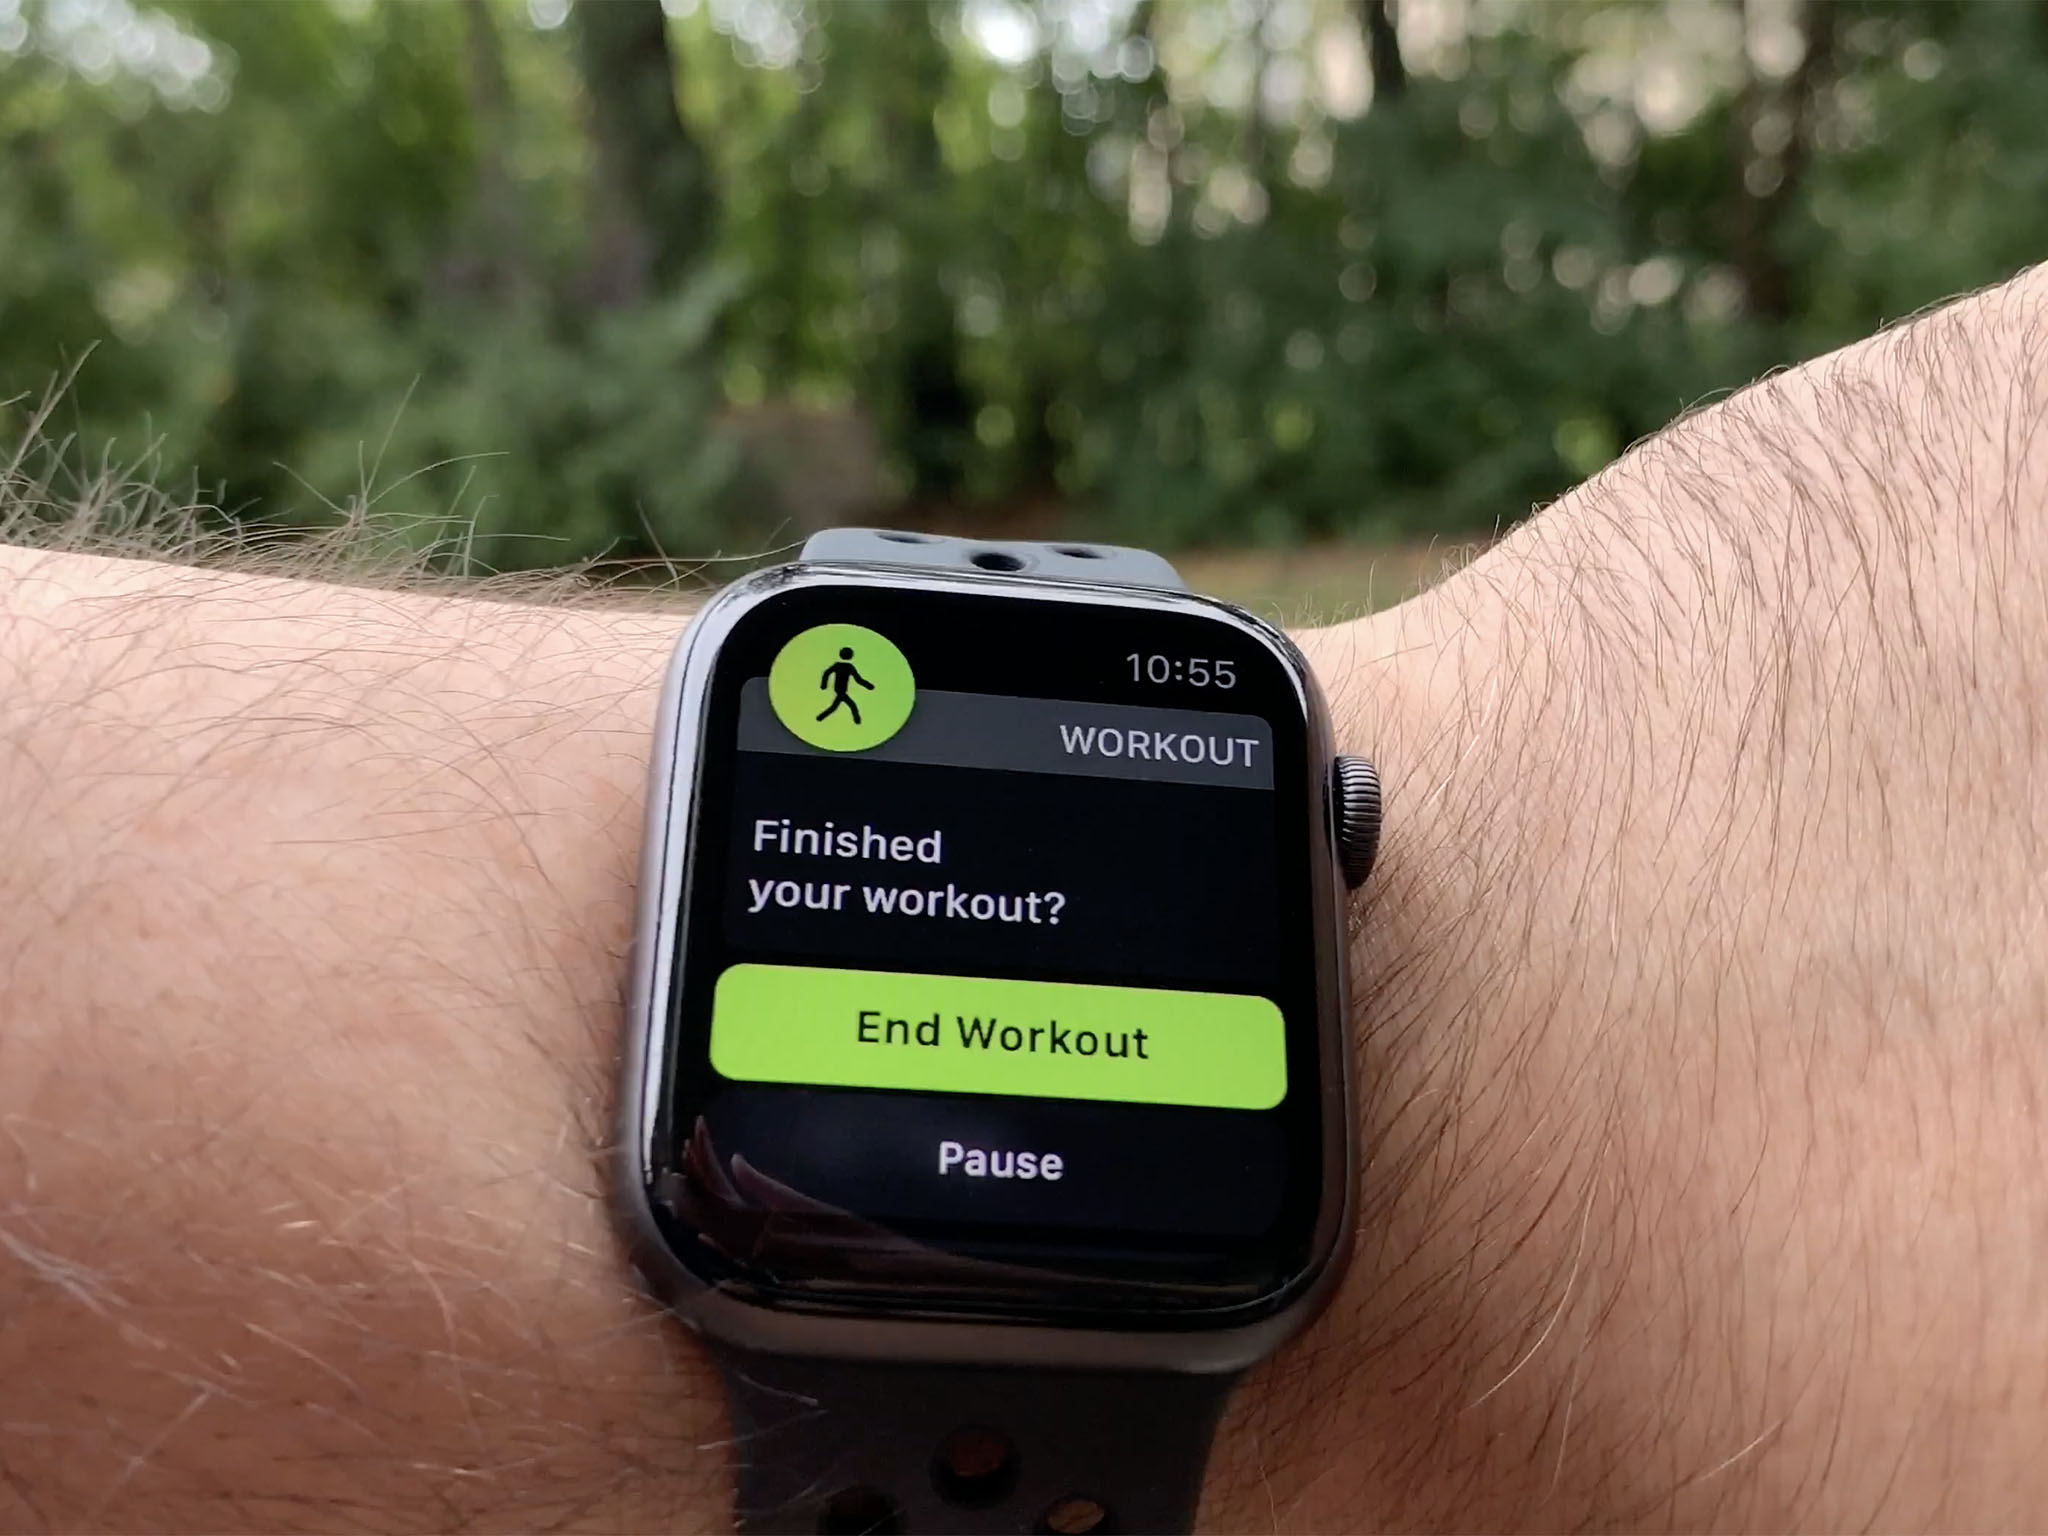 apple watch nike series 4 review